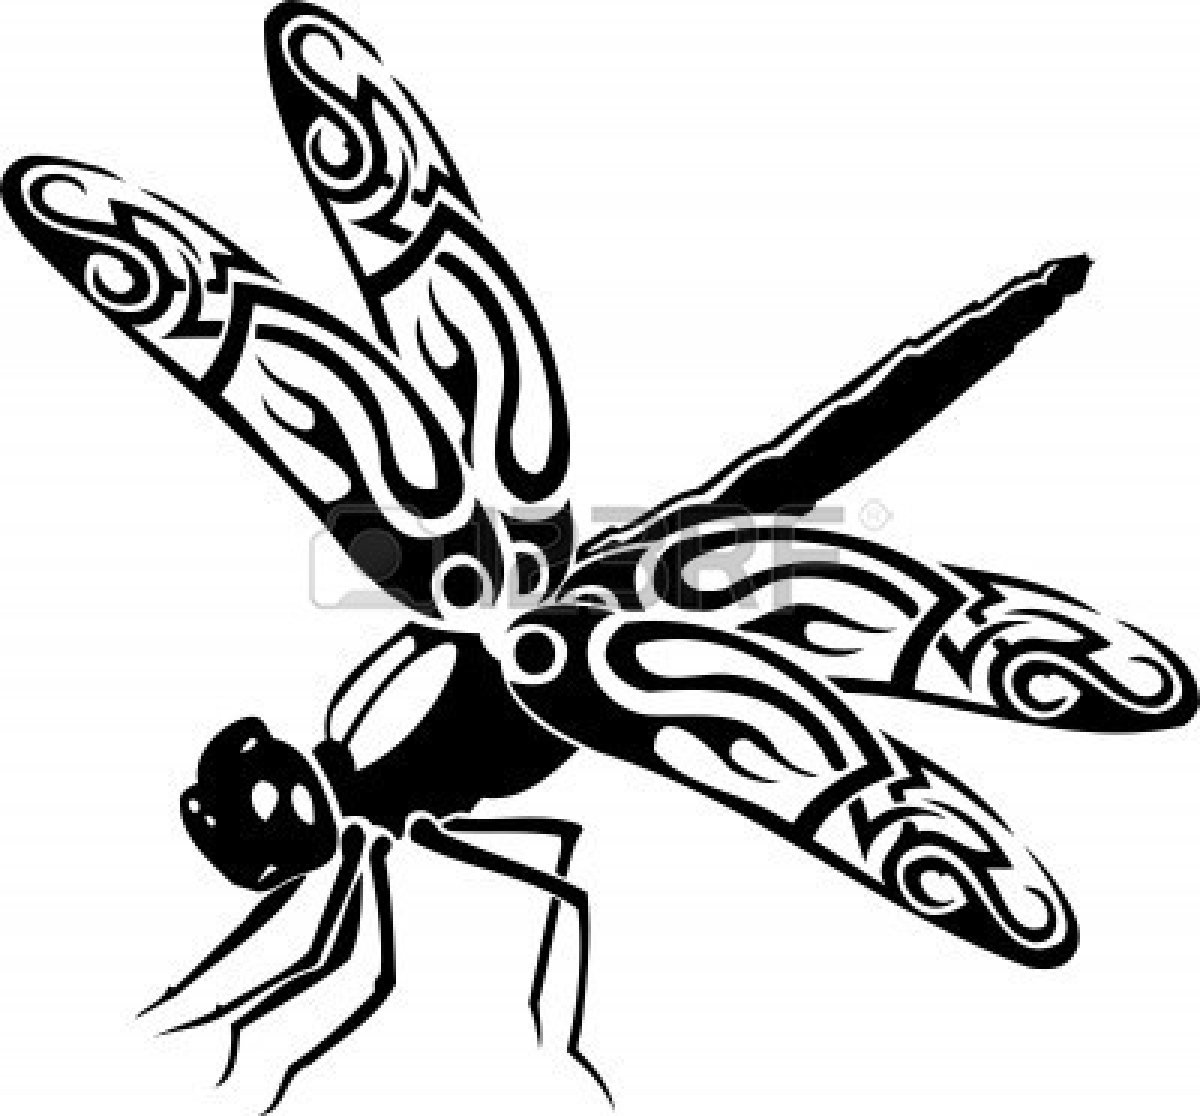 Dragonfly Silhouette   Clipart Panda   Free Clipart Images